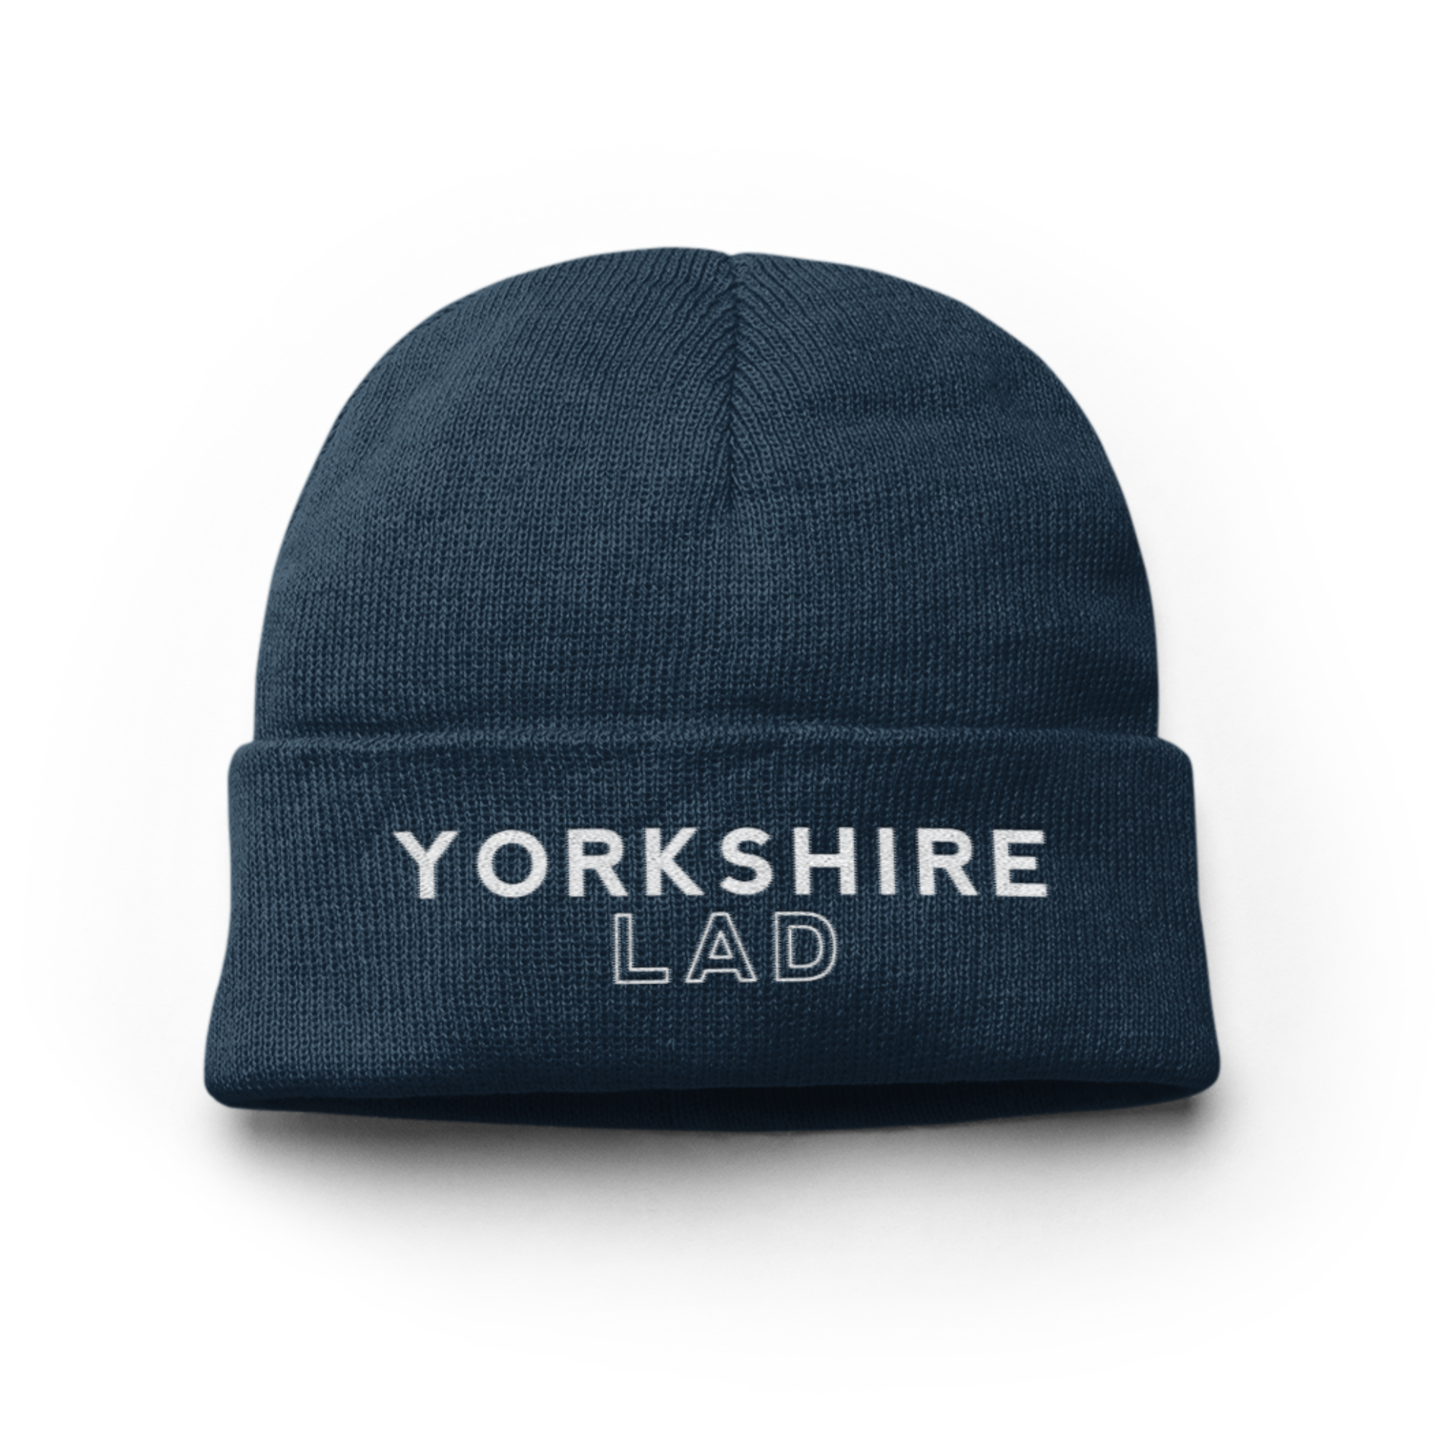 Yorkshire Lad Beanie Hat - The Great Yorkshire Shop